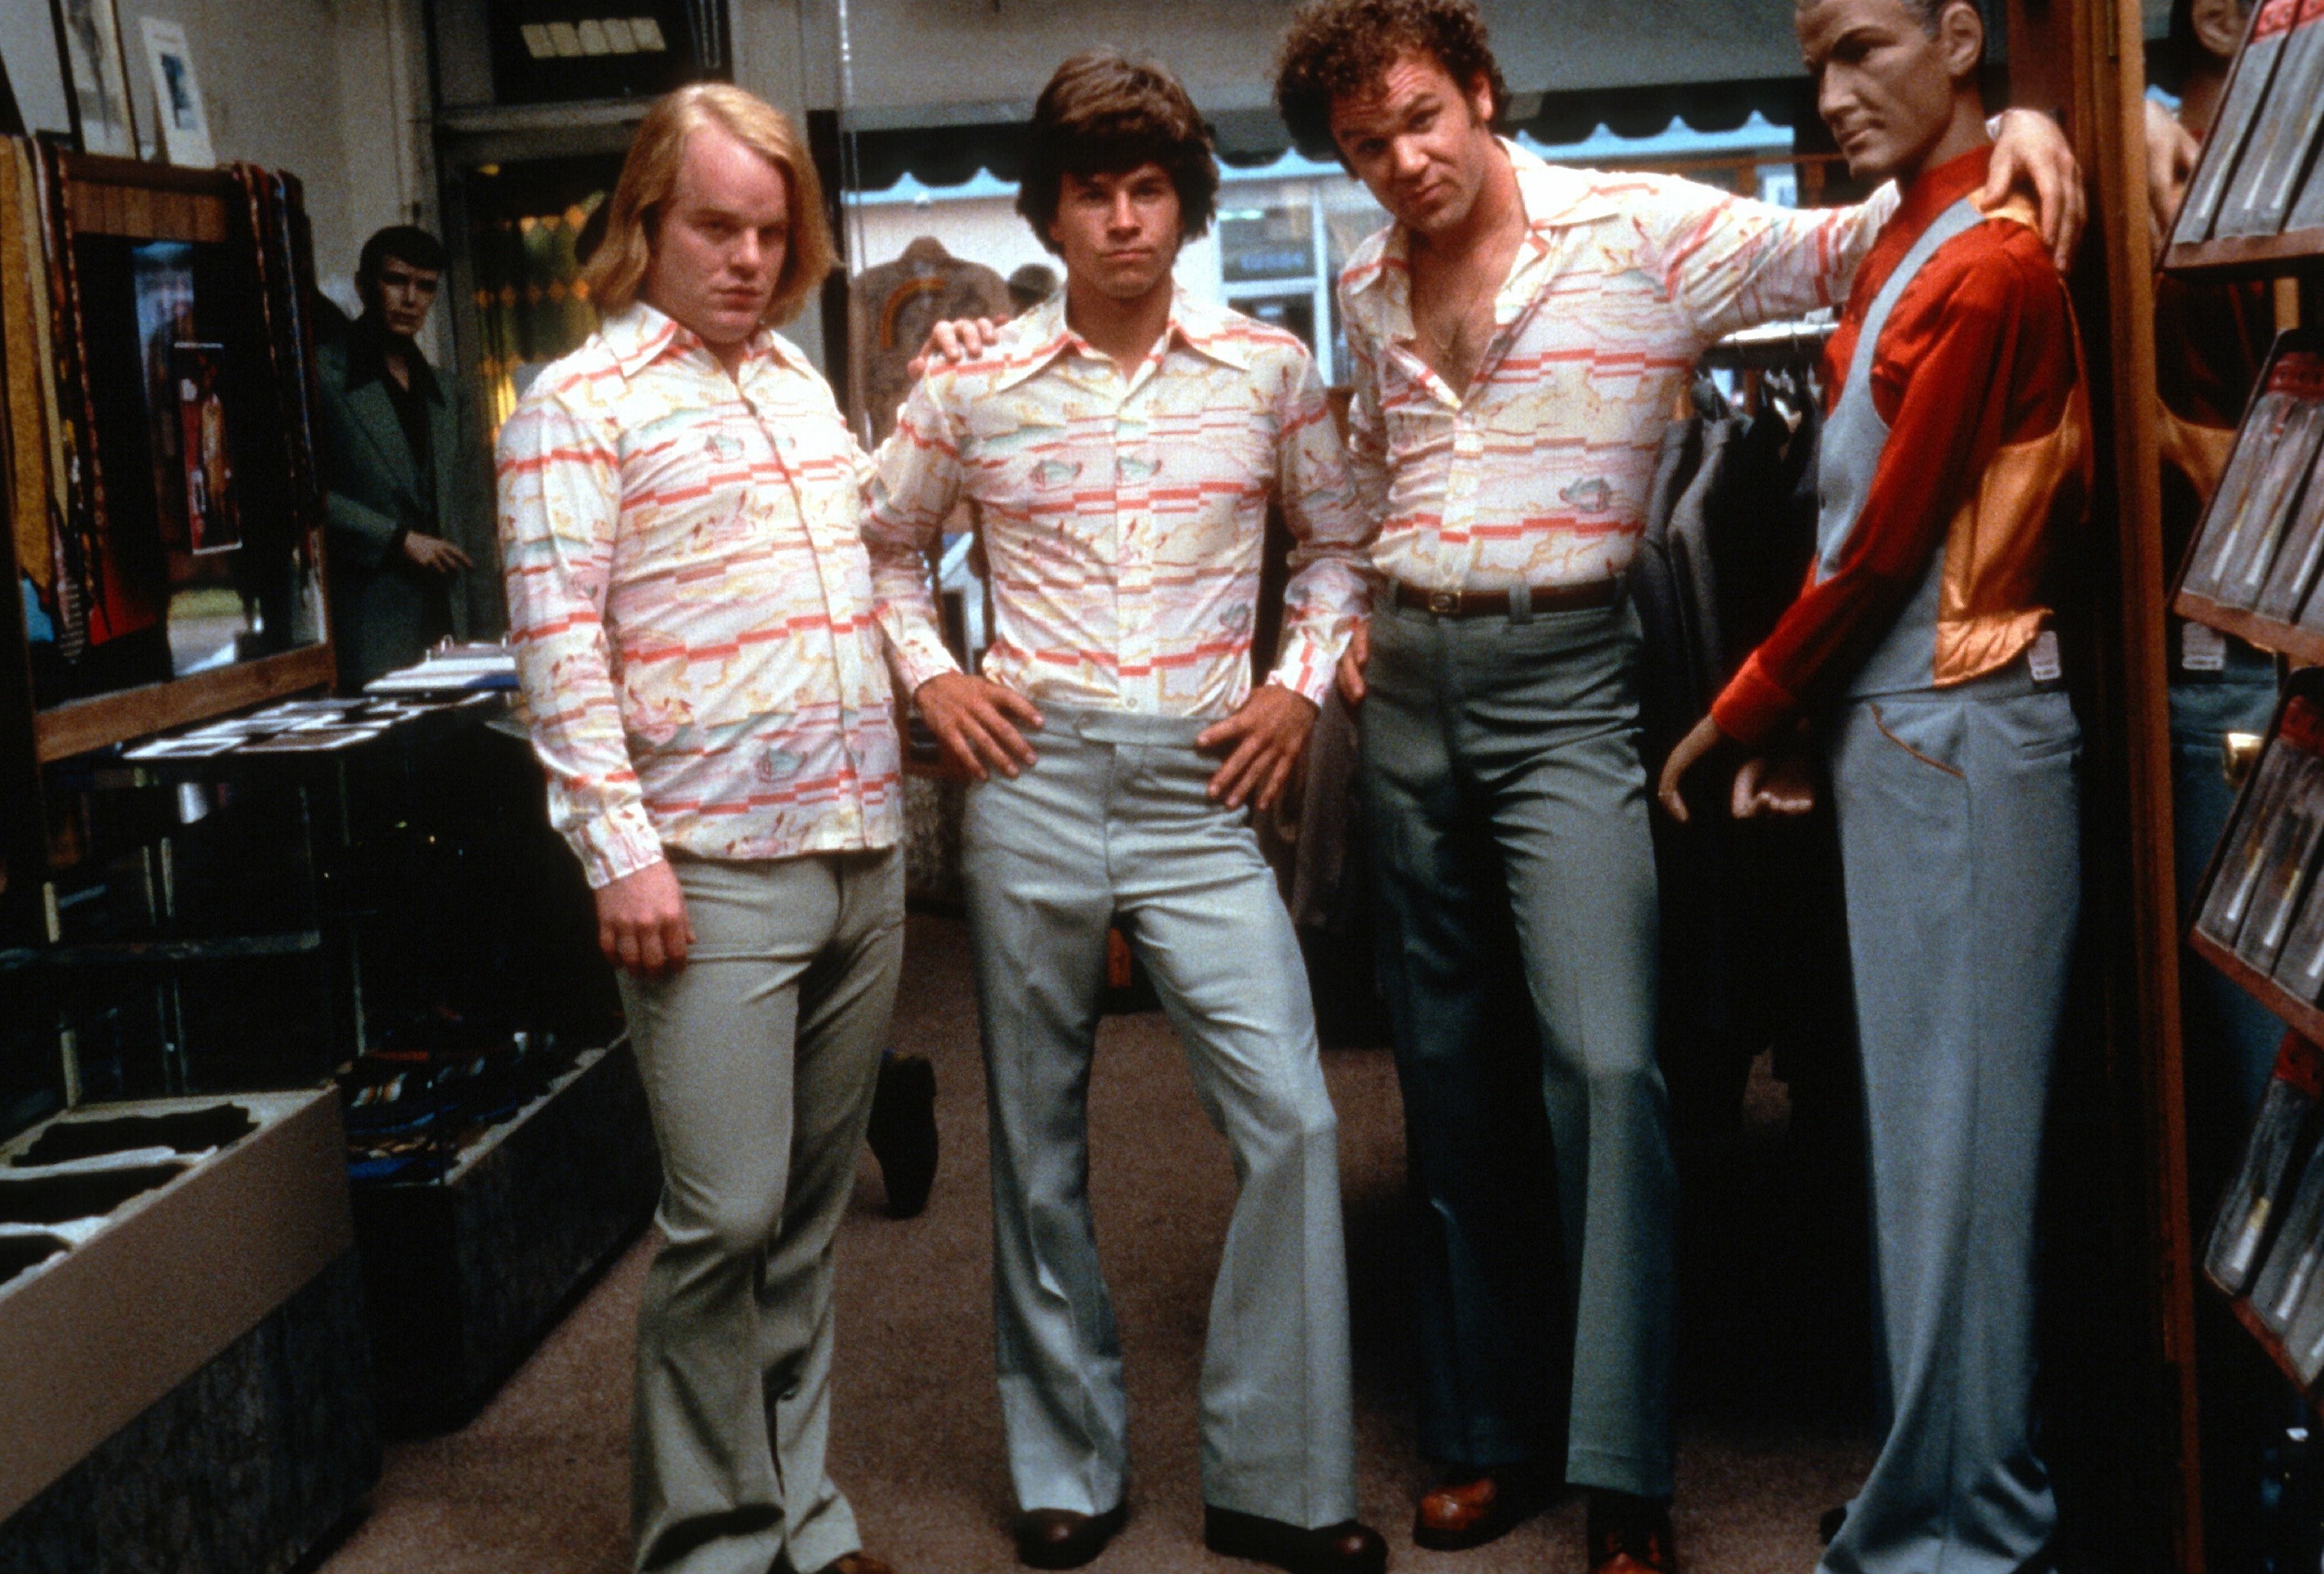 Boogie Nights' cast: Where are they now?